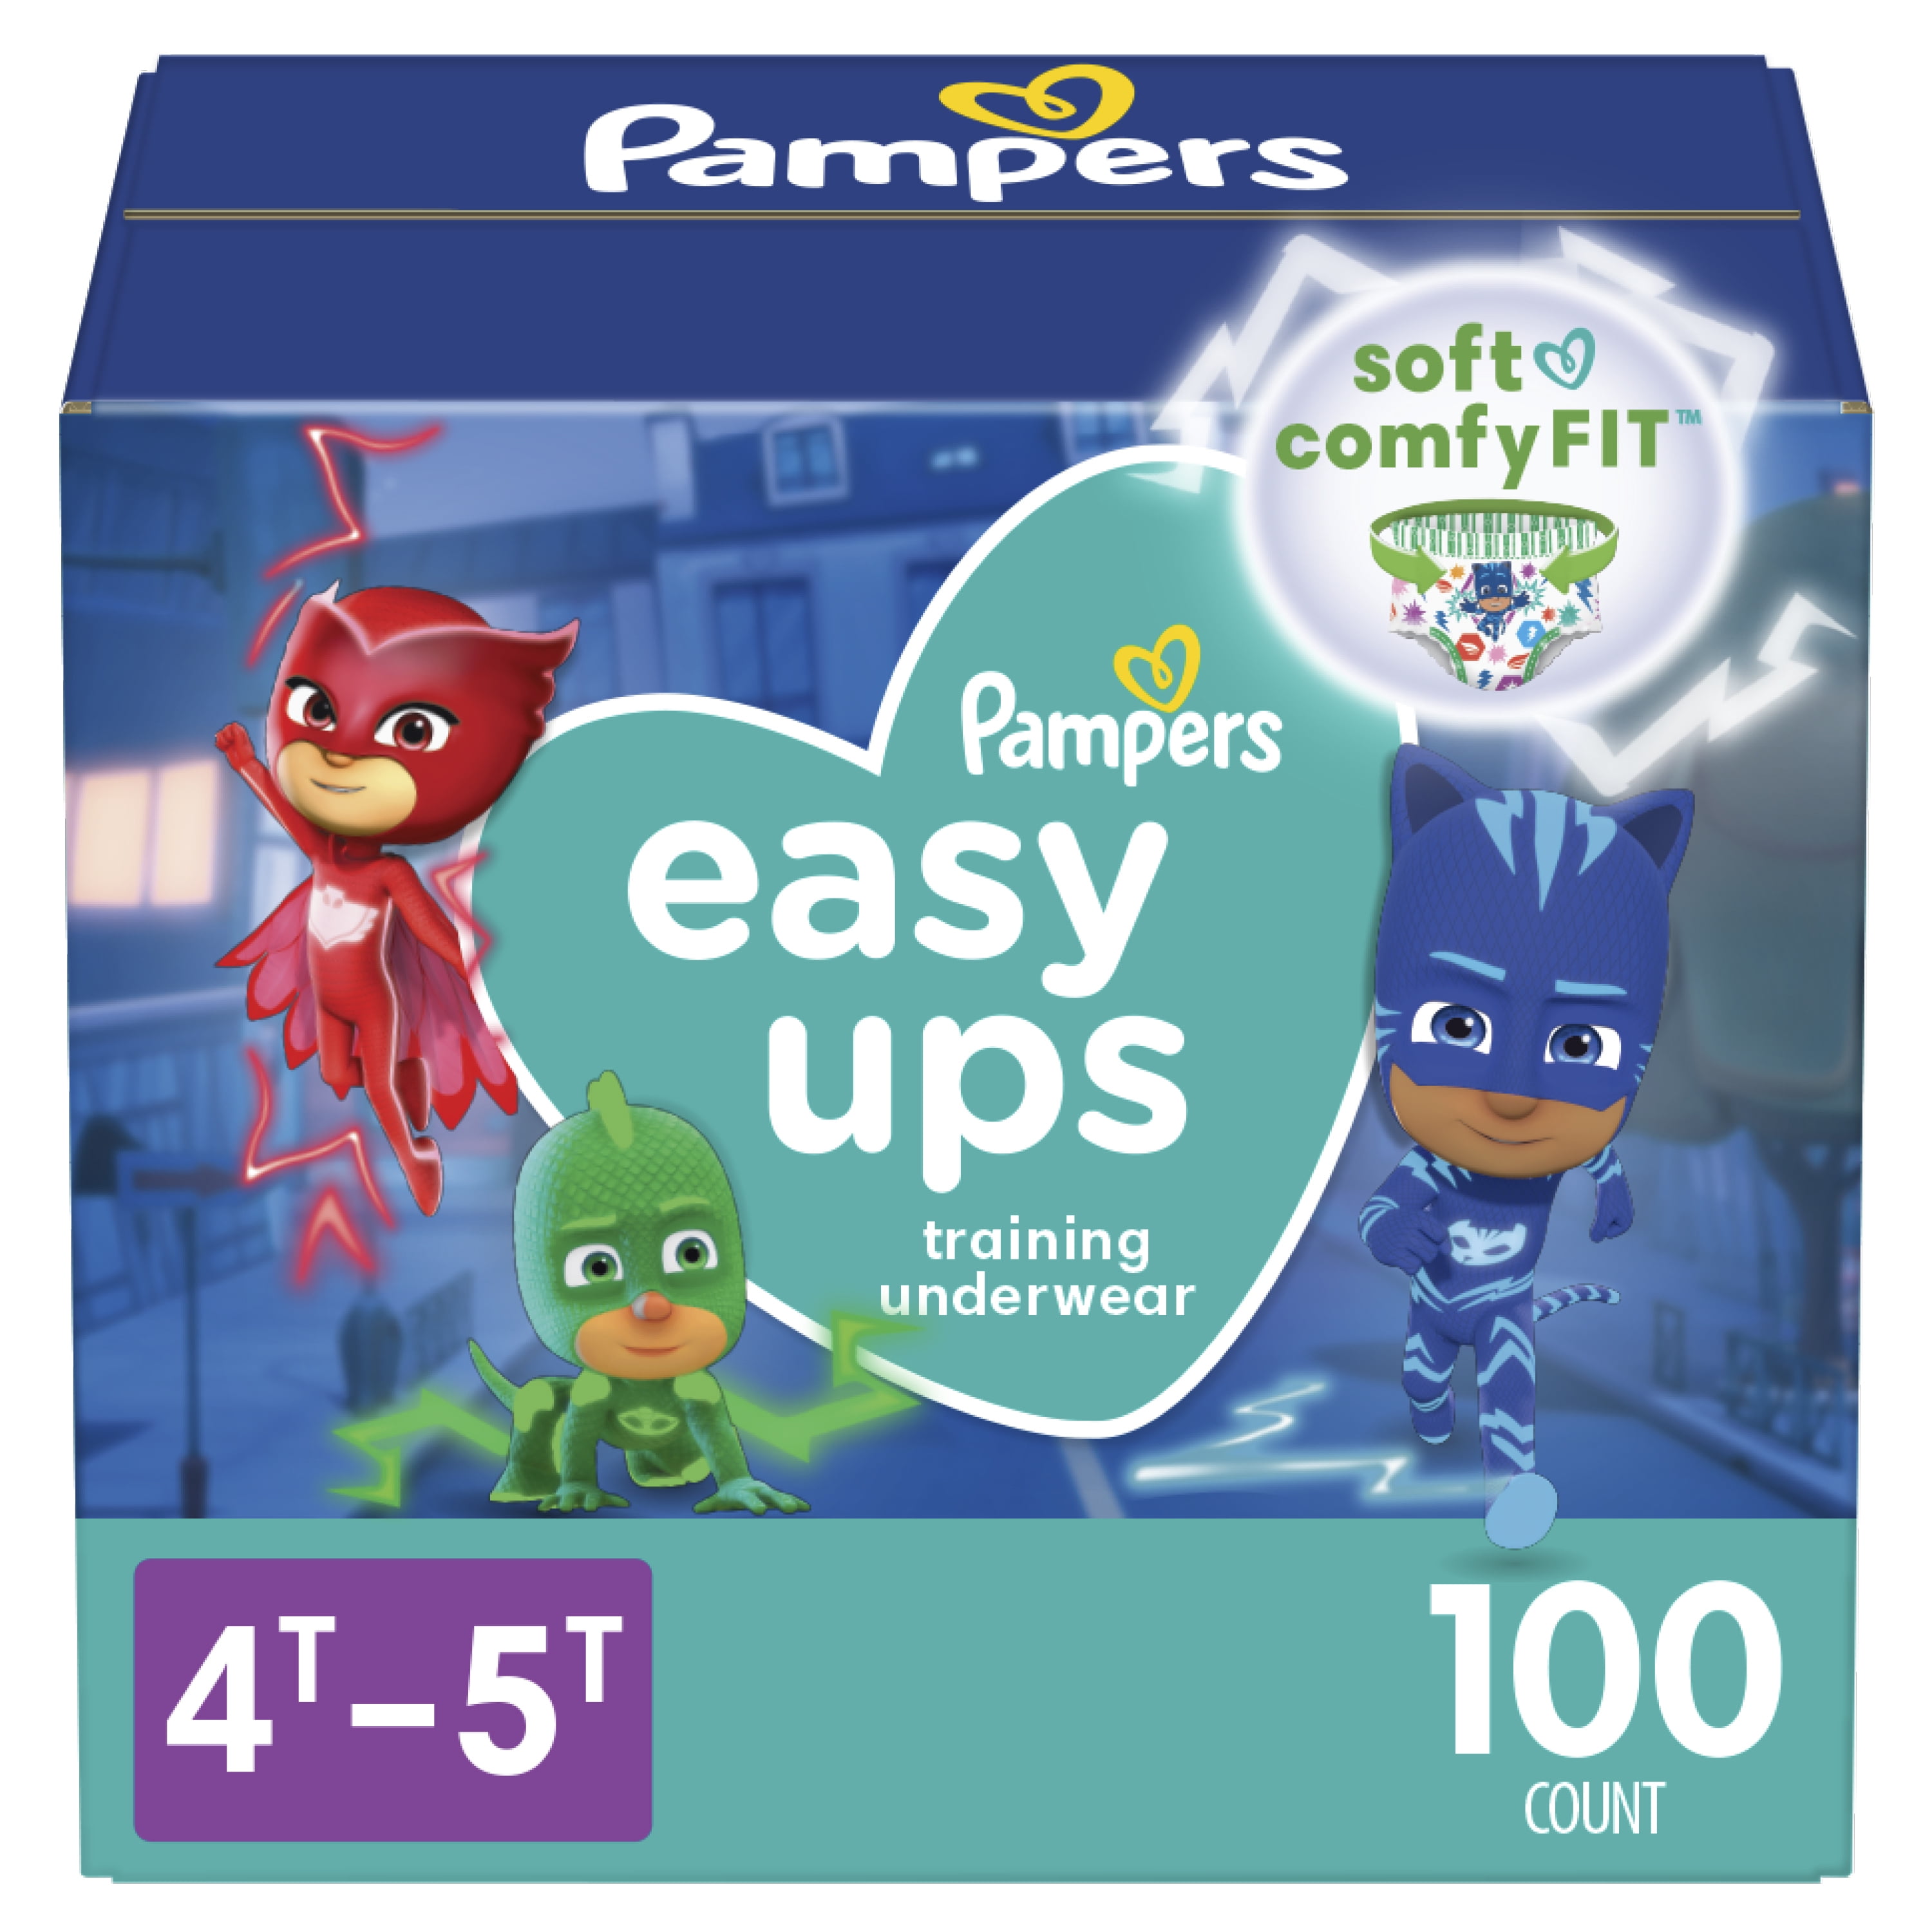 Pampers Easy Ups Training Underwear Boys, 4T-5T, 100 Ct 